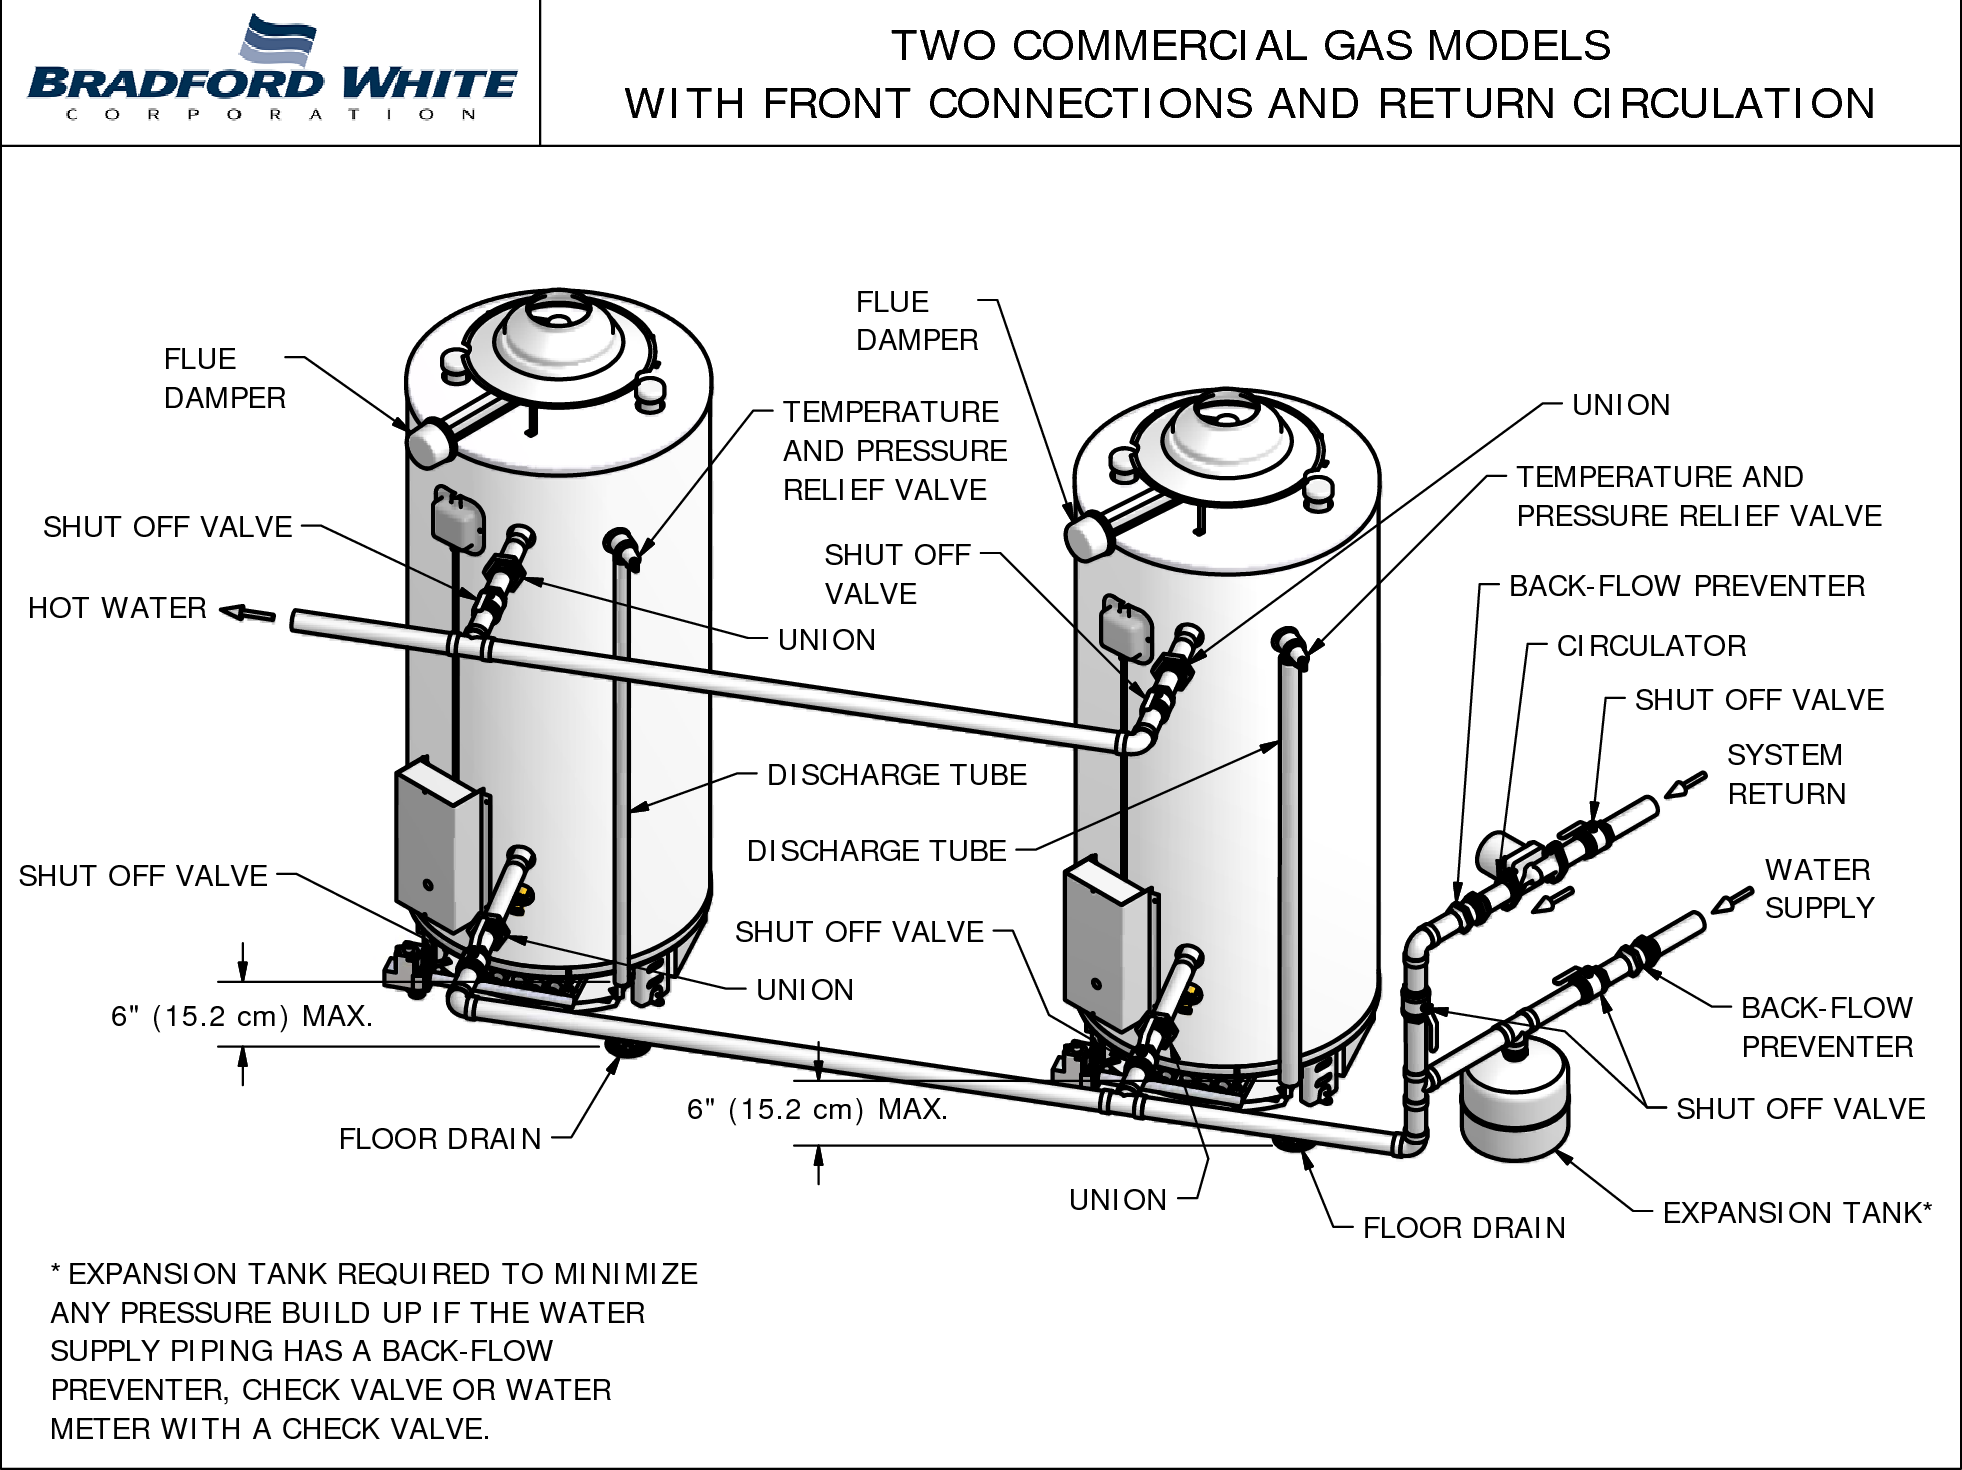 Page 1 of 1 - Bradfordwhite Piping Diagram Commercial Gas Two Water Heaters With Front Connections And Return Circulation D80T180 C2G0FR User Manual